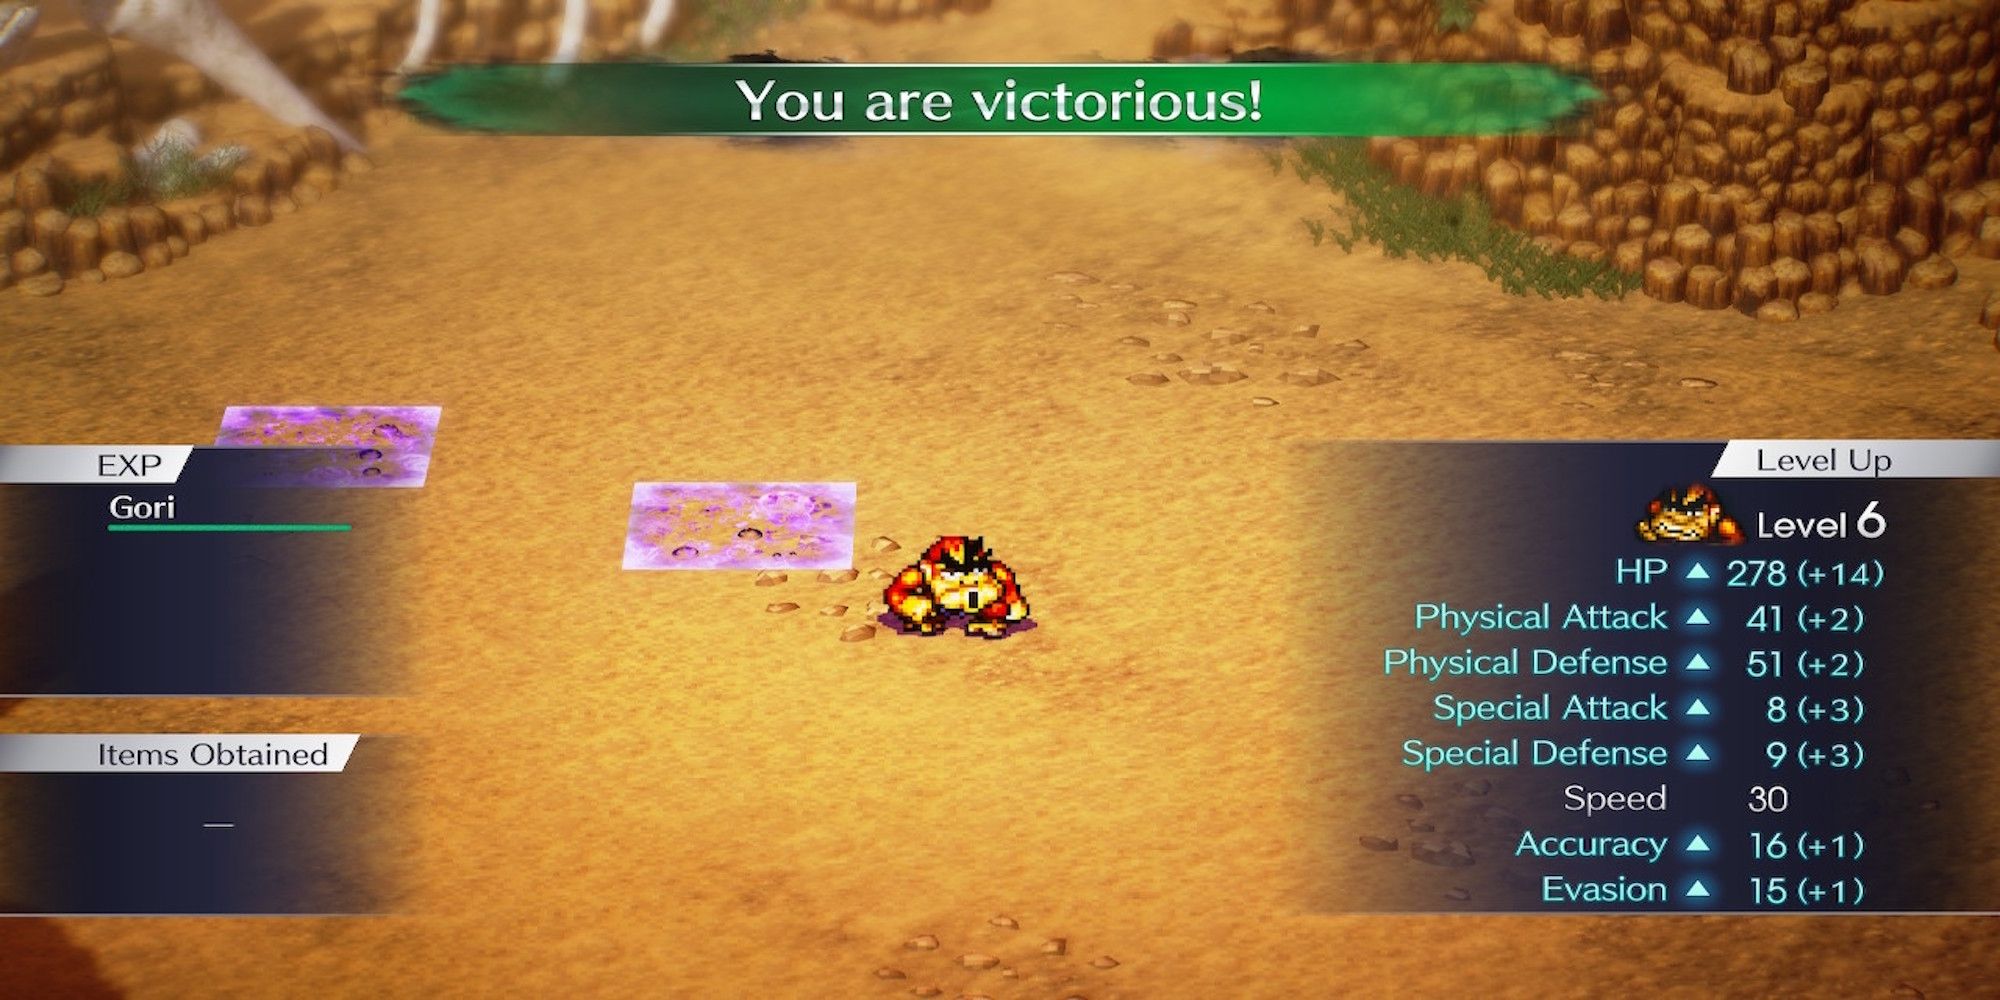 The victory screen in Live a Live